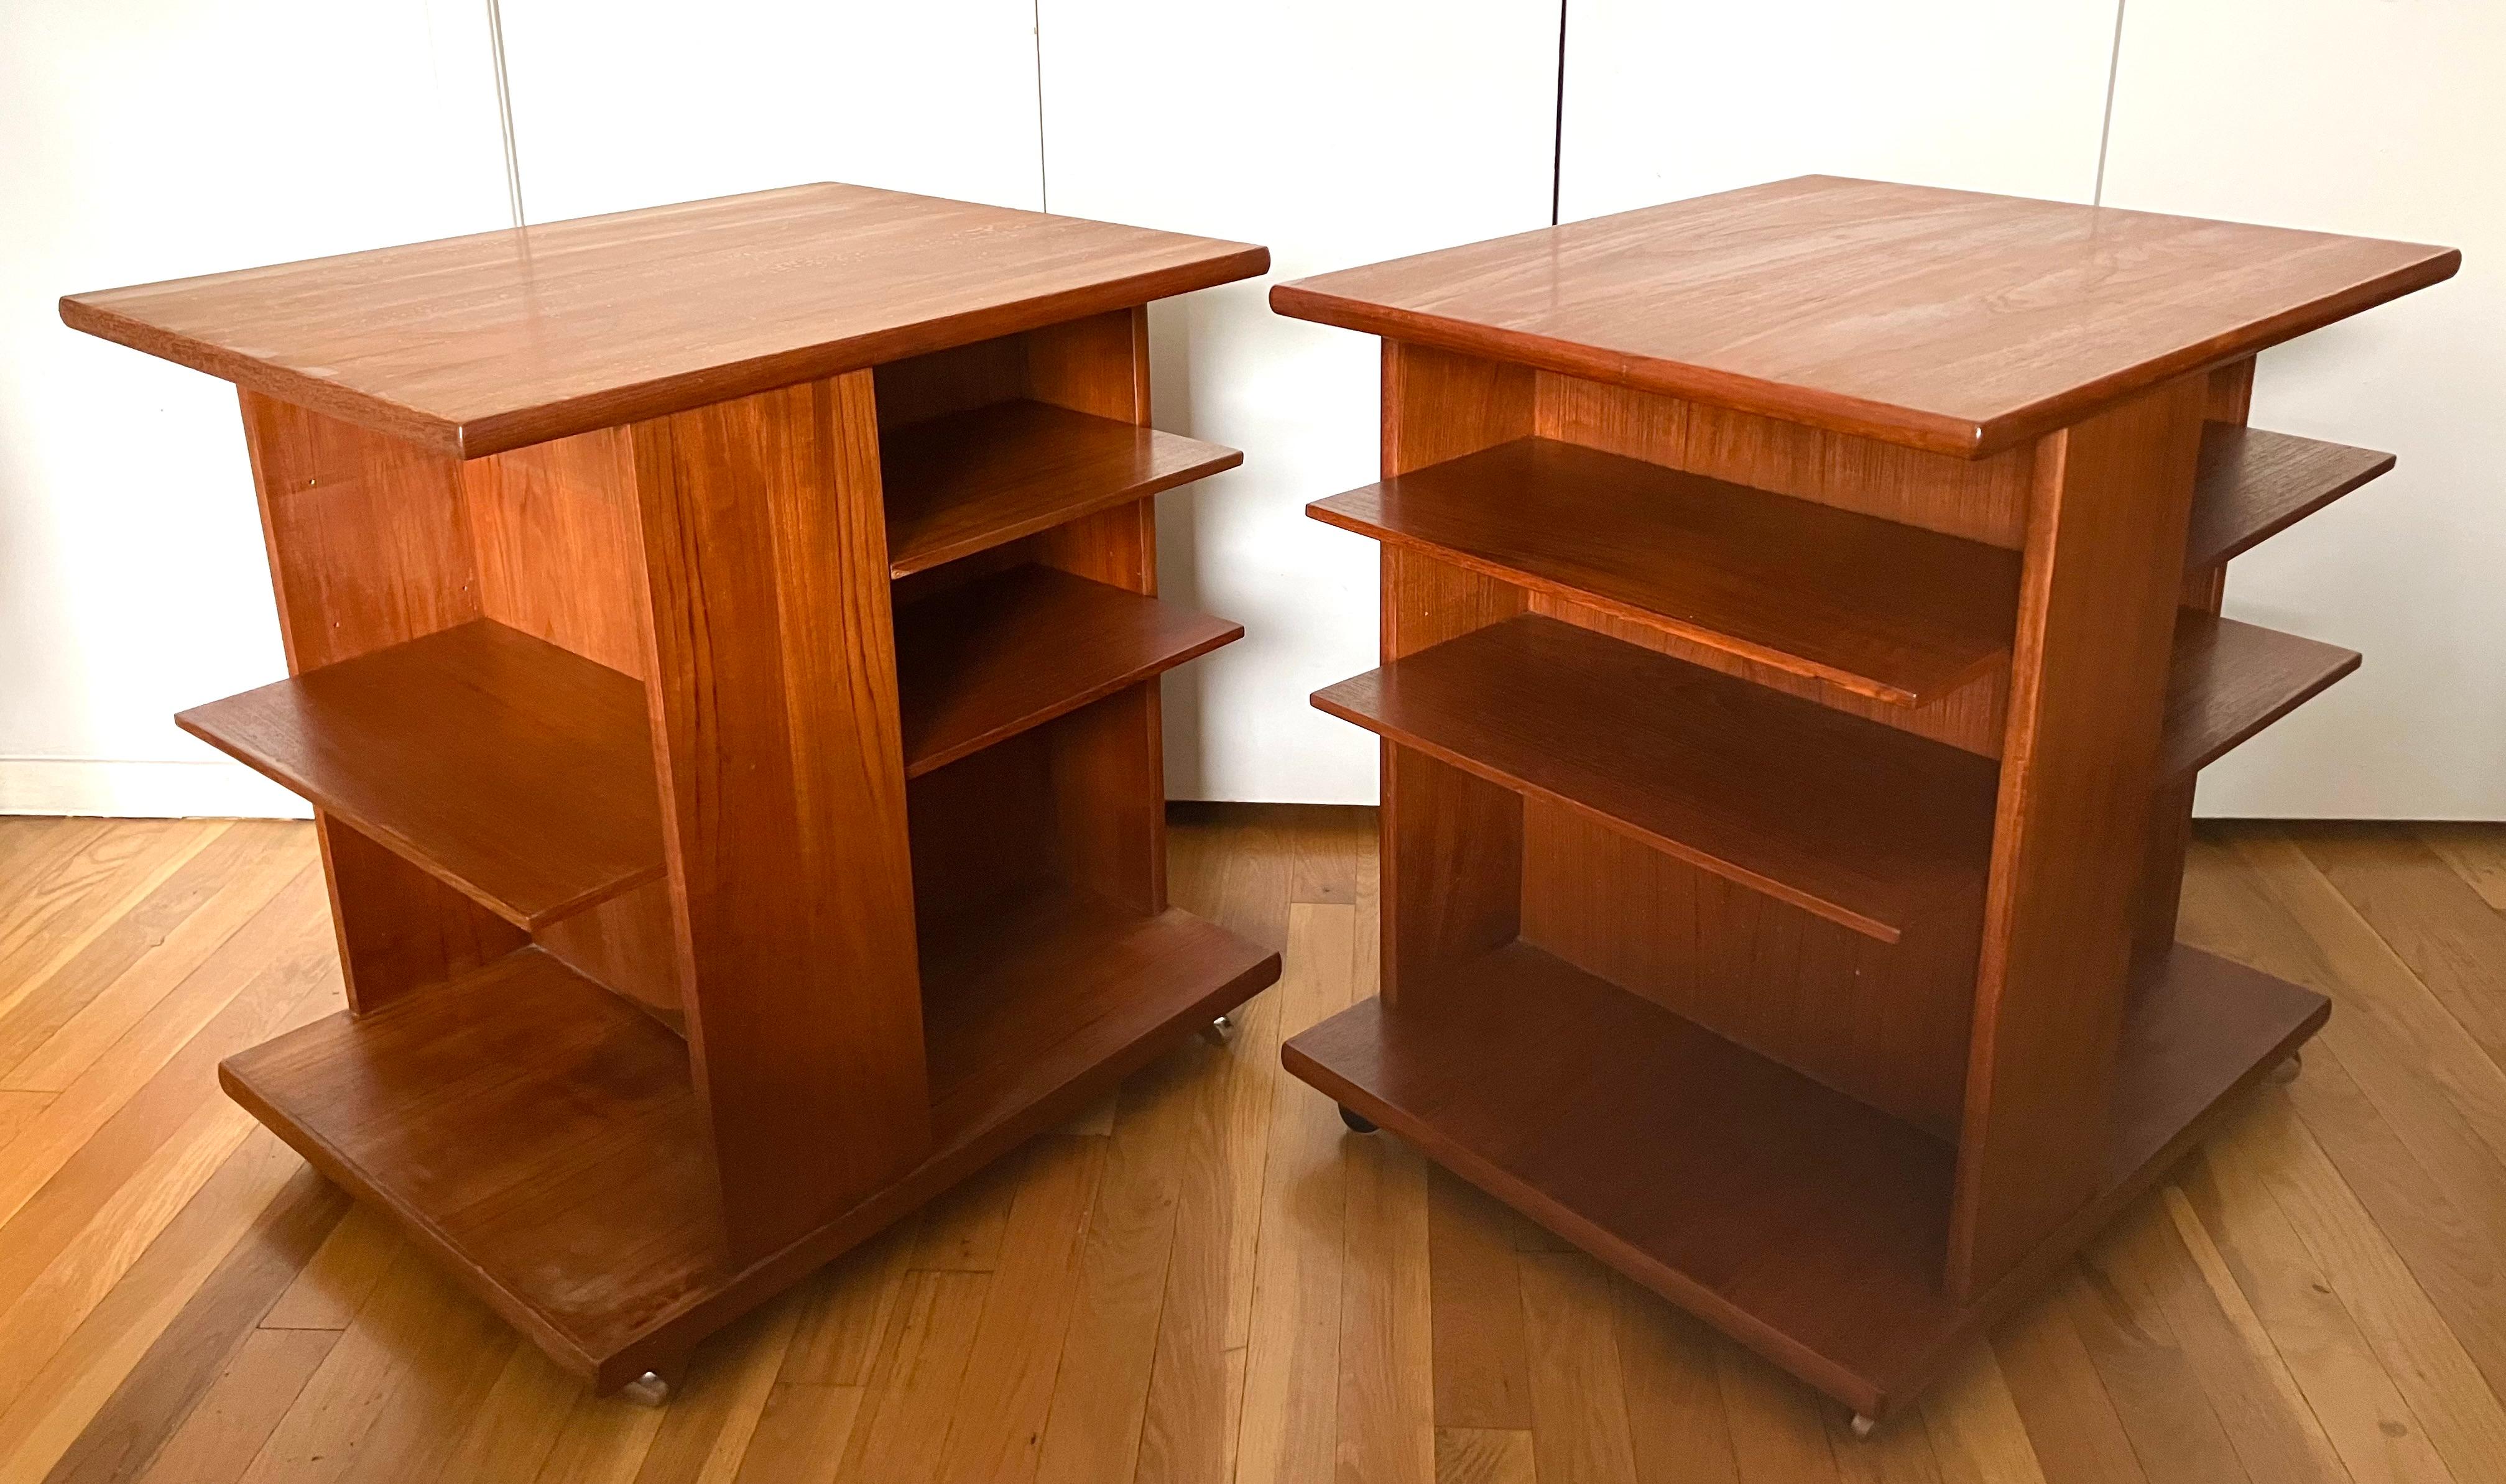 Handsome and masculine pair of Danish Modern rolling bookcase side tables raised on chrome casters. Divided into three shelving sections, each table has two adjustable shelves in two bays and a single adjustable shelf in a third bay.